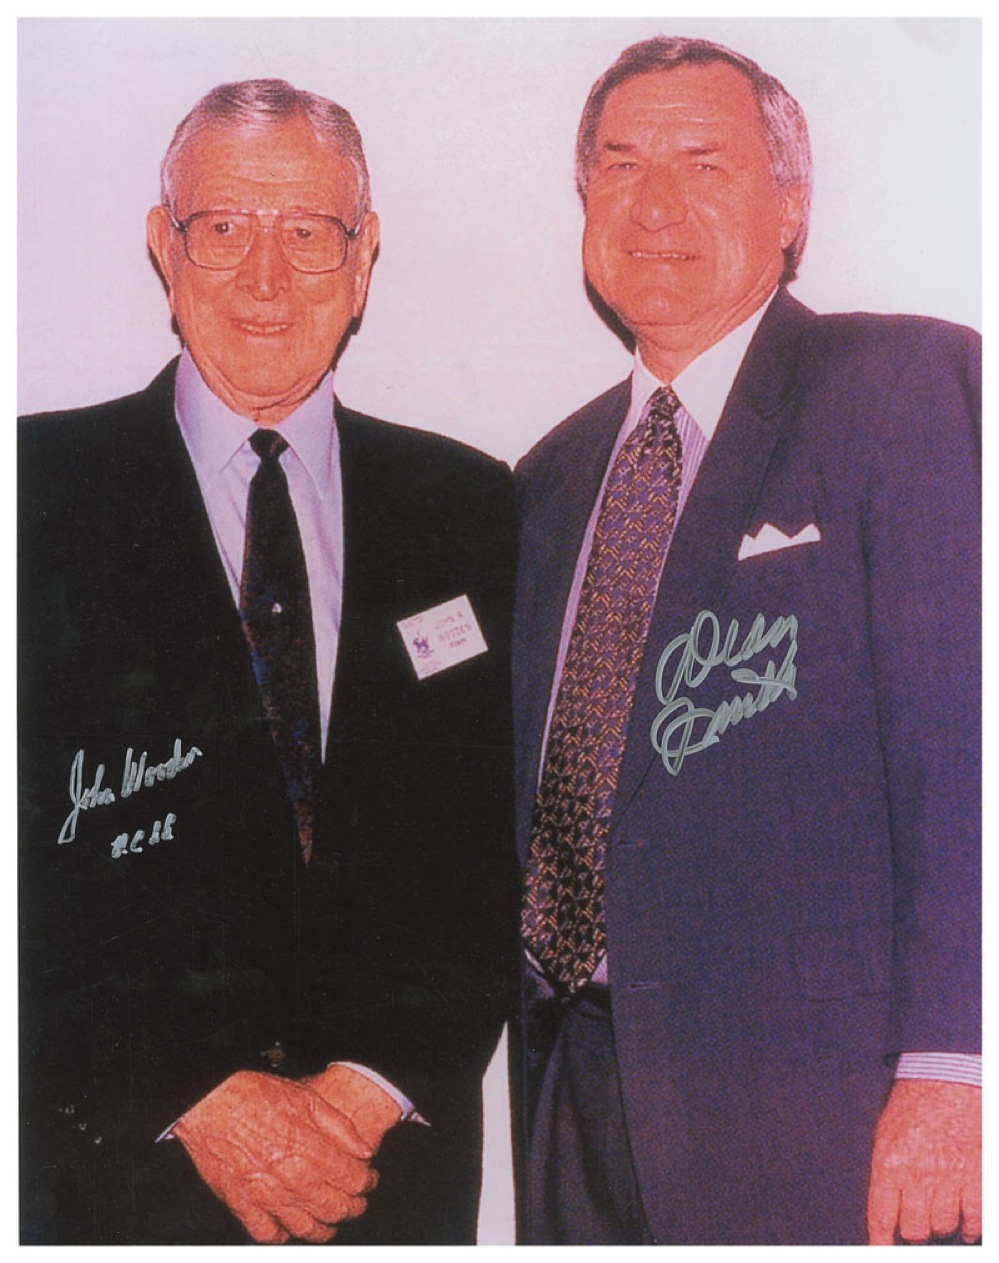 Lot #1573 John Wooden and Dean Smith